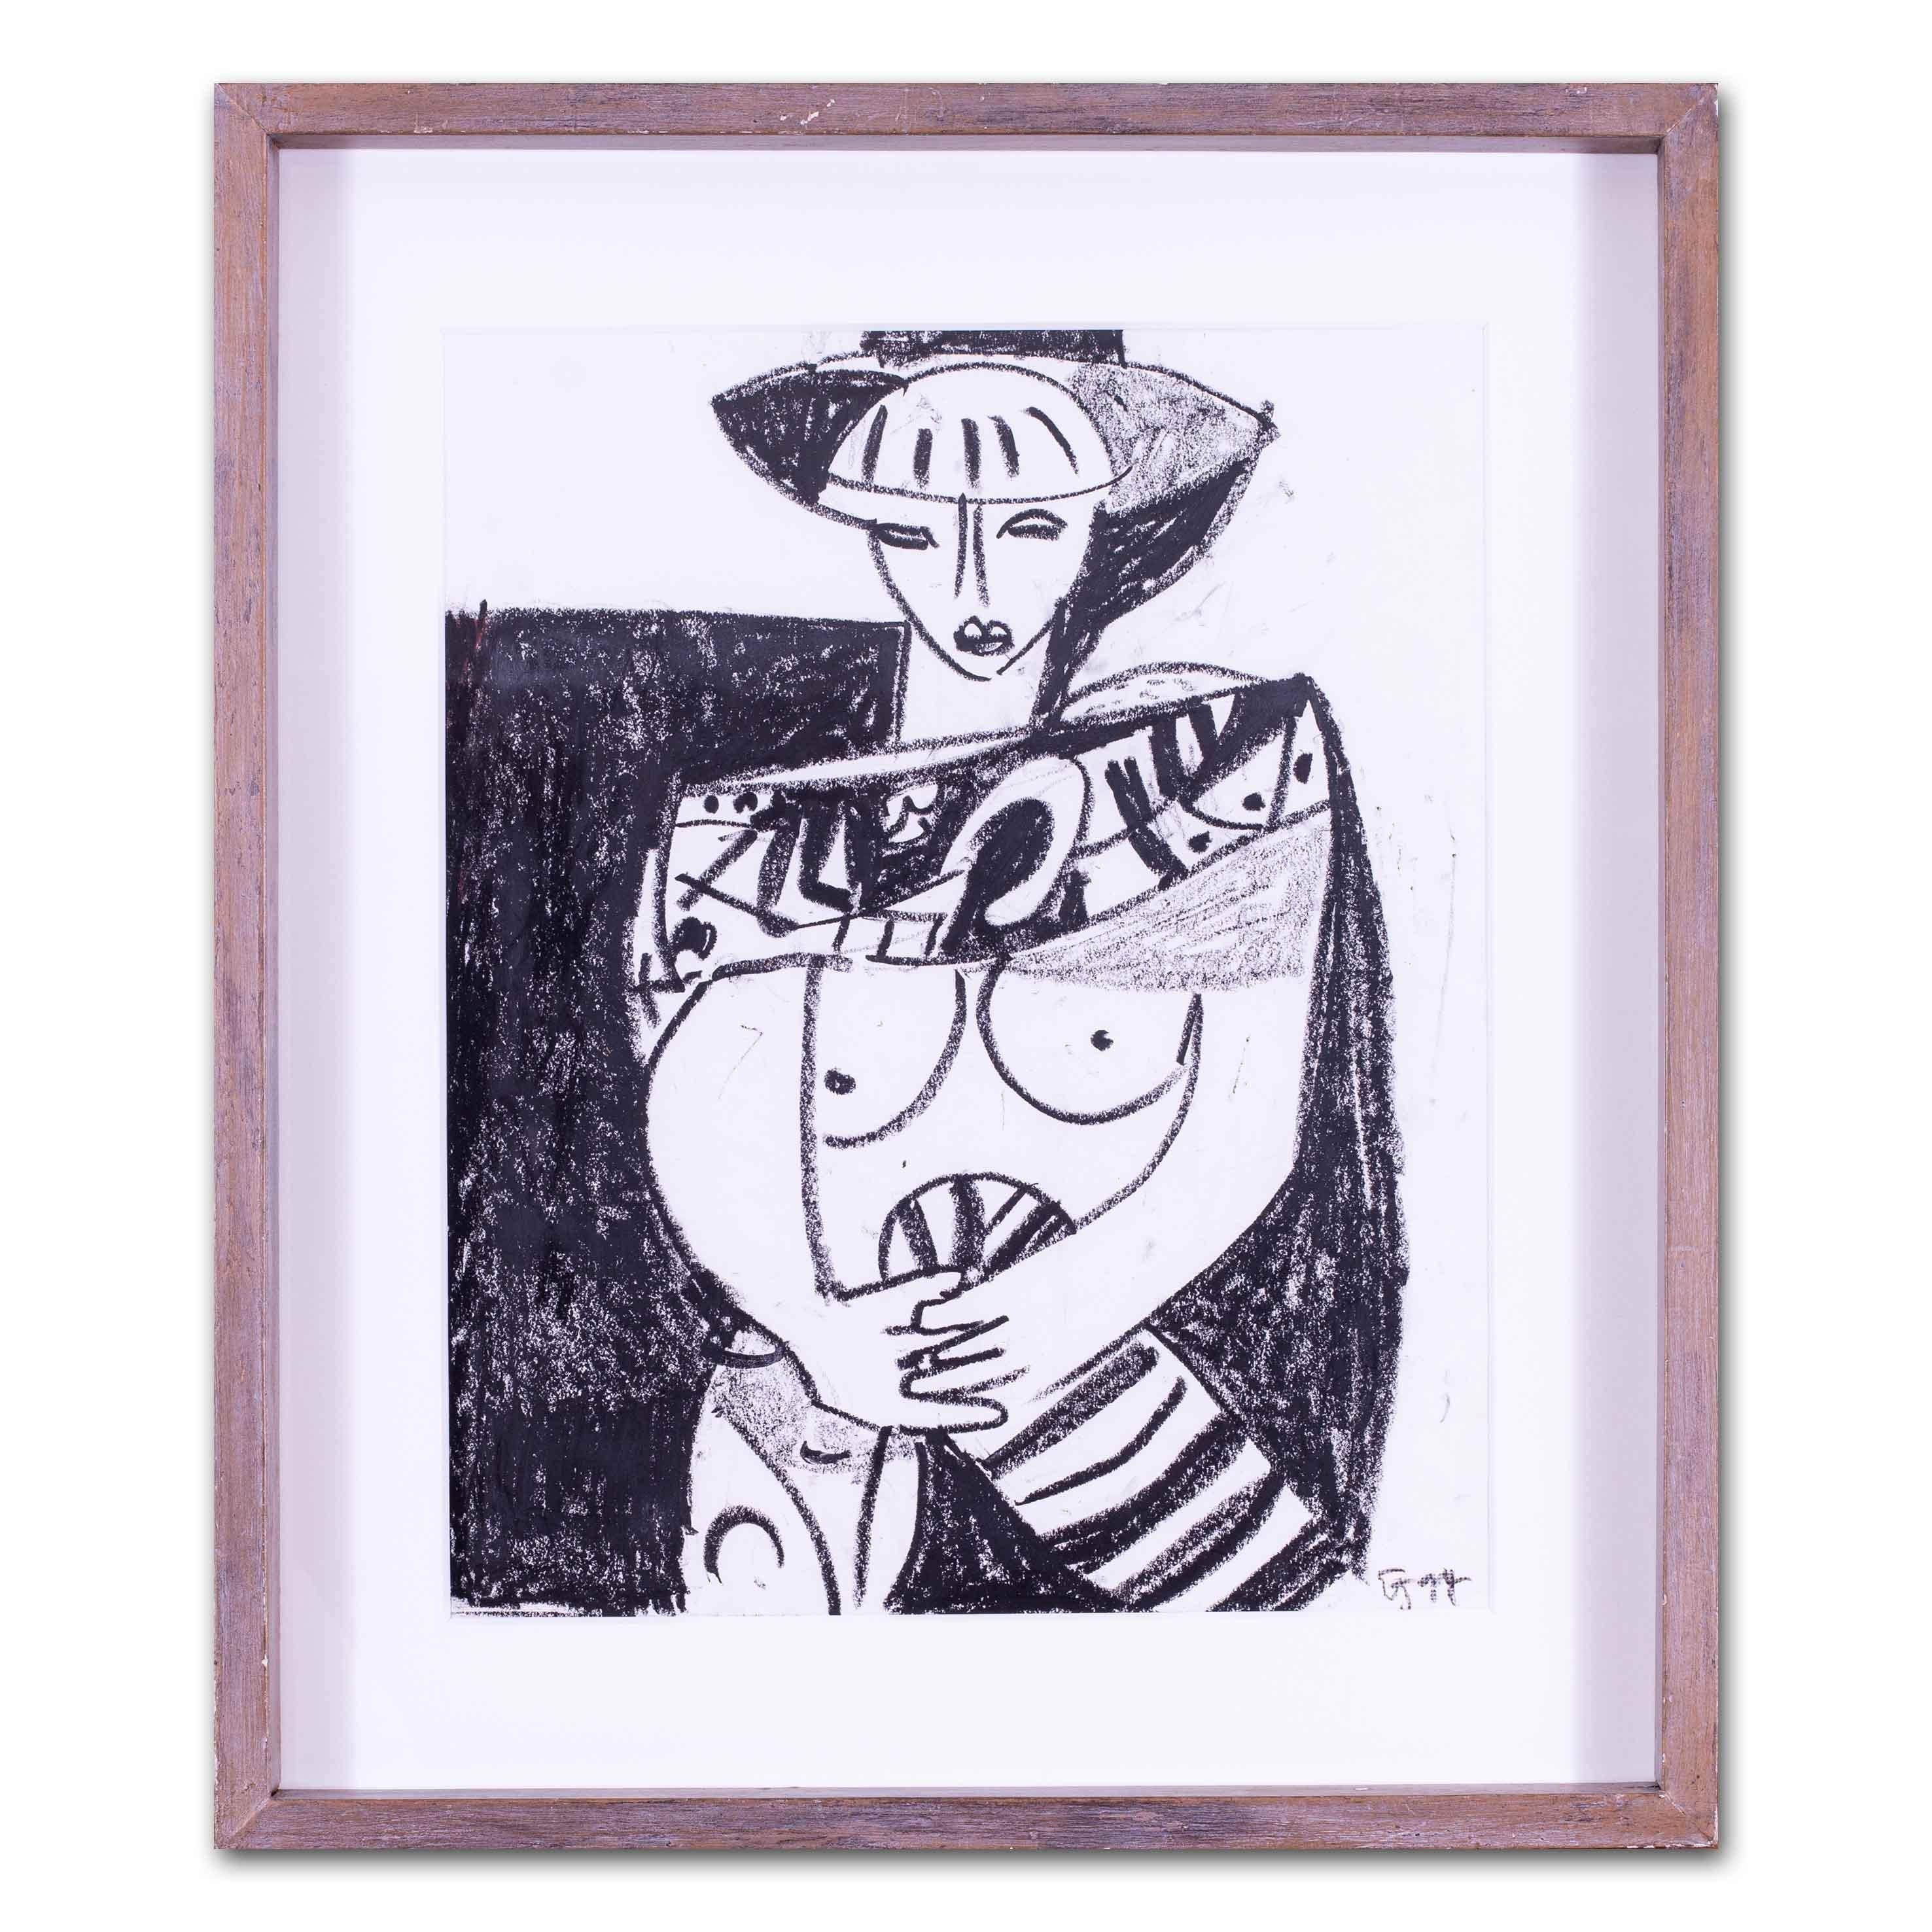 A really eye-catching black and white figurative work by Modern British artist Ewart Johns (1923 - 2013) 'A Homage to Picasso'

Ewart Johns (British, 1923 – 2013)
Homage to Picasso
Pastel on paper
Signed with initials and dated ‘EJ 94’ (lower